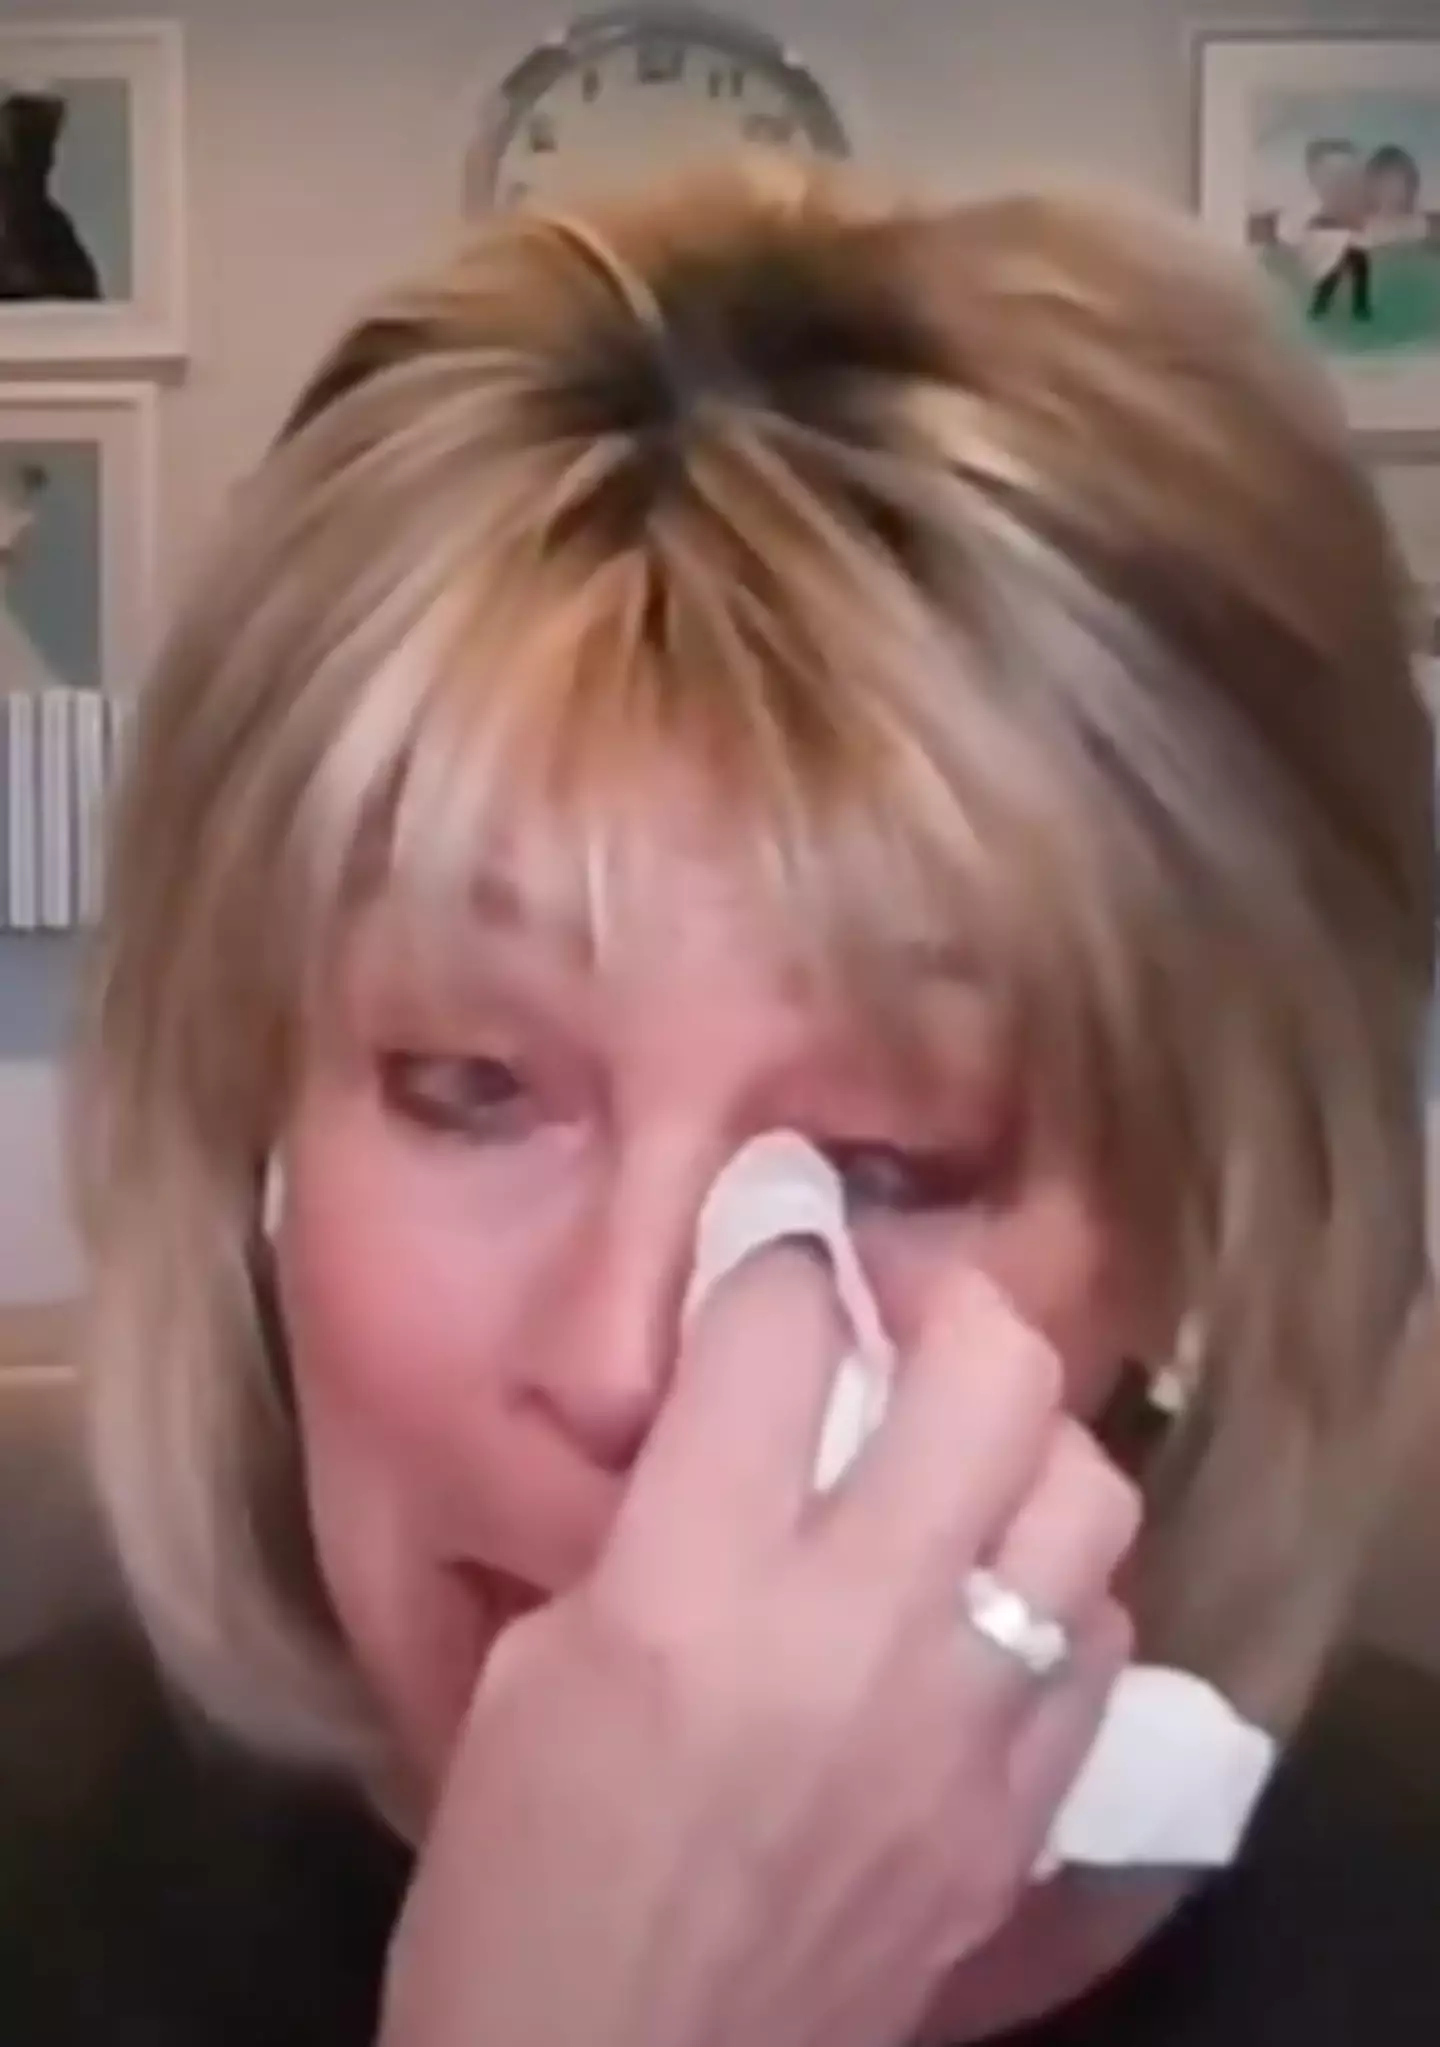 She broke down in tears while discussing her son.